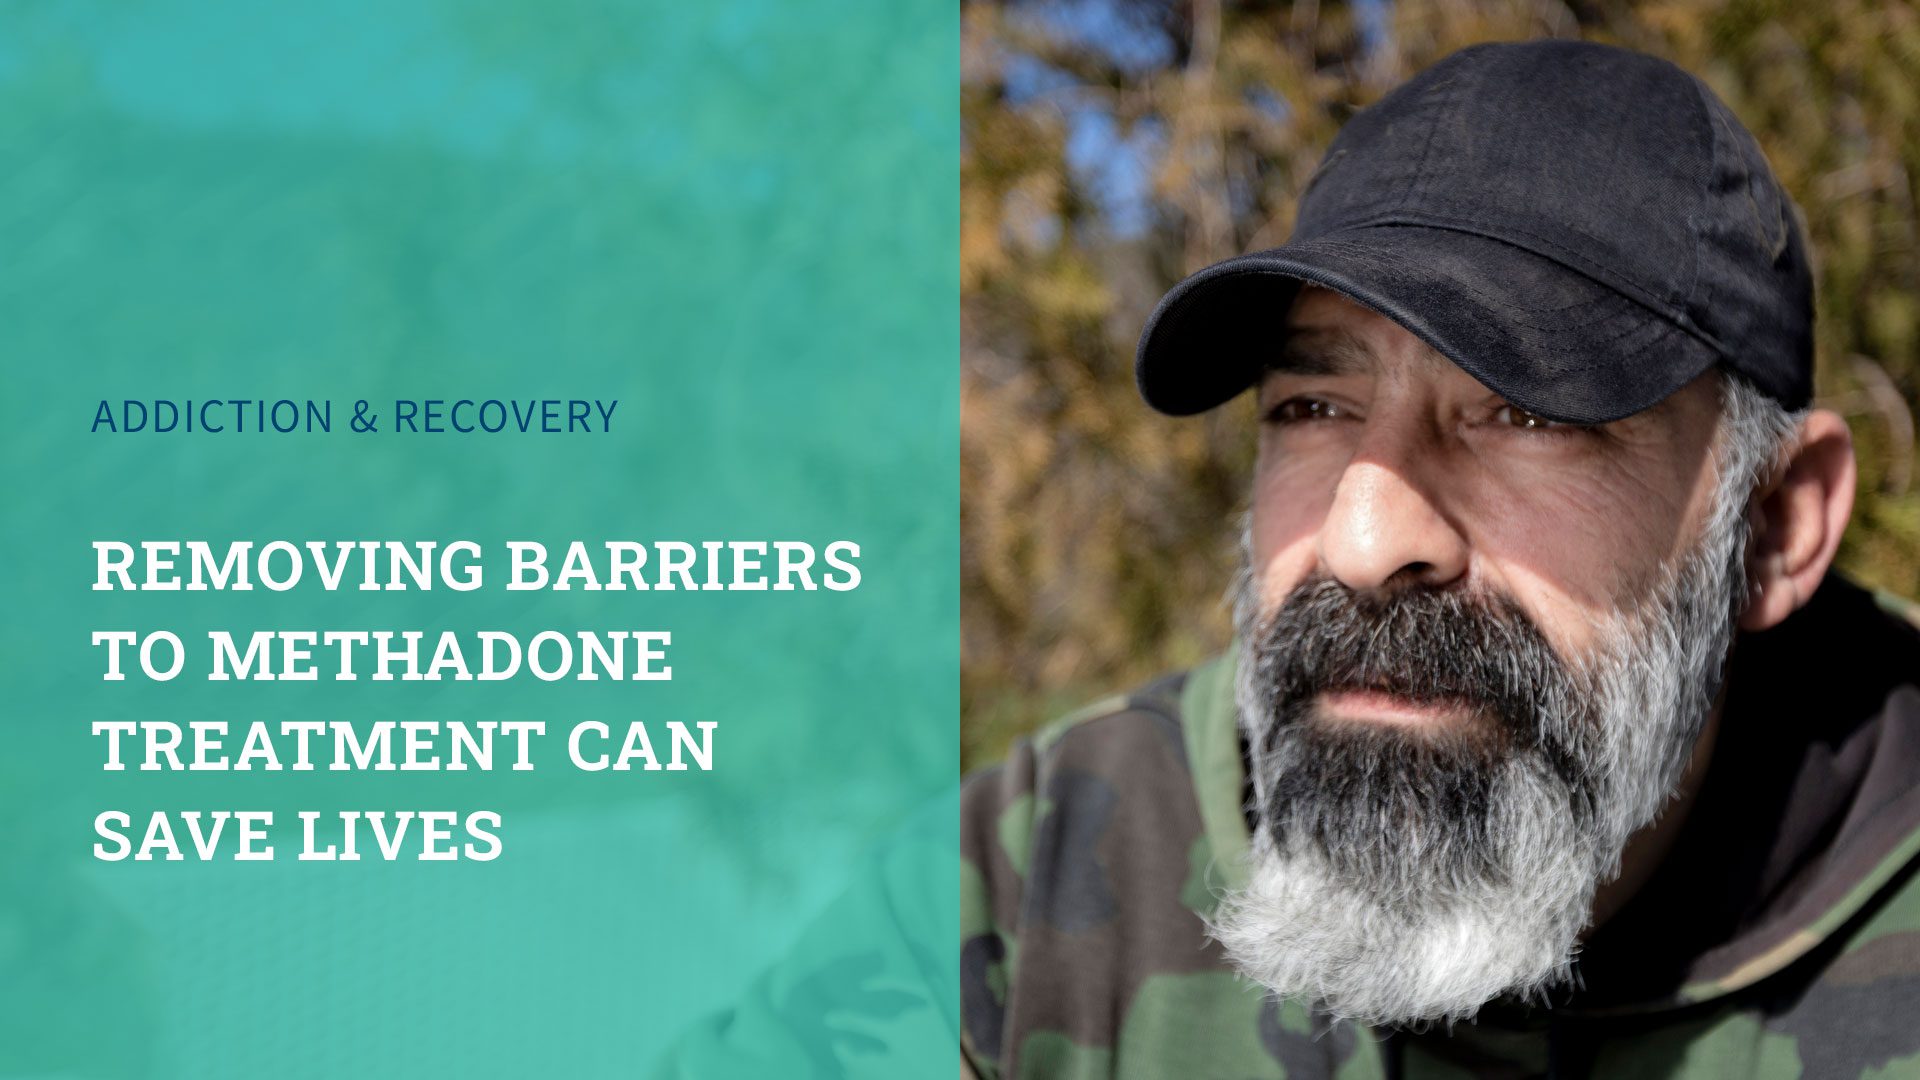 Pew Center Research Report: Removing Barriers to Methadone Treatment Can Save Lives